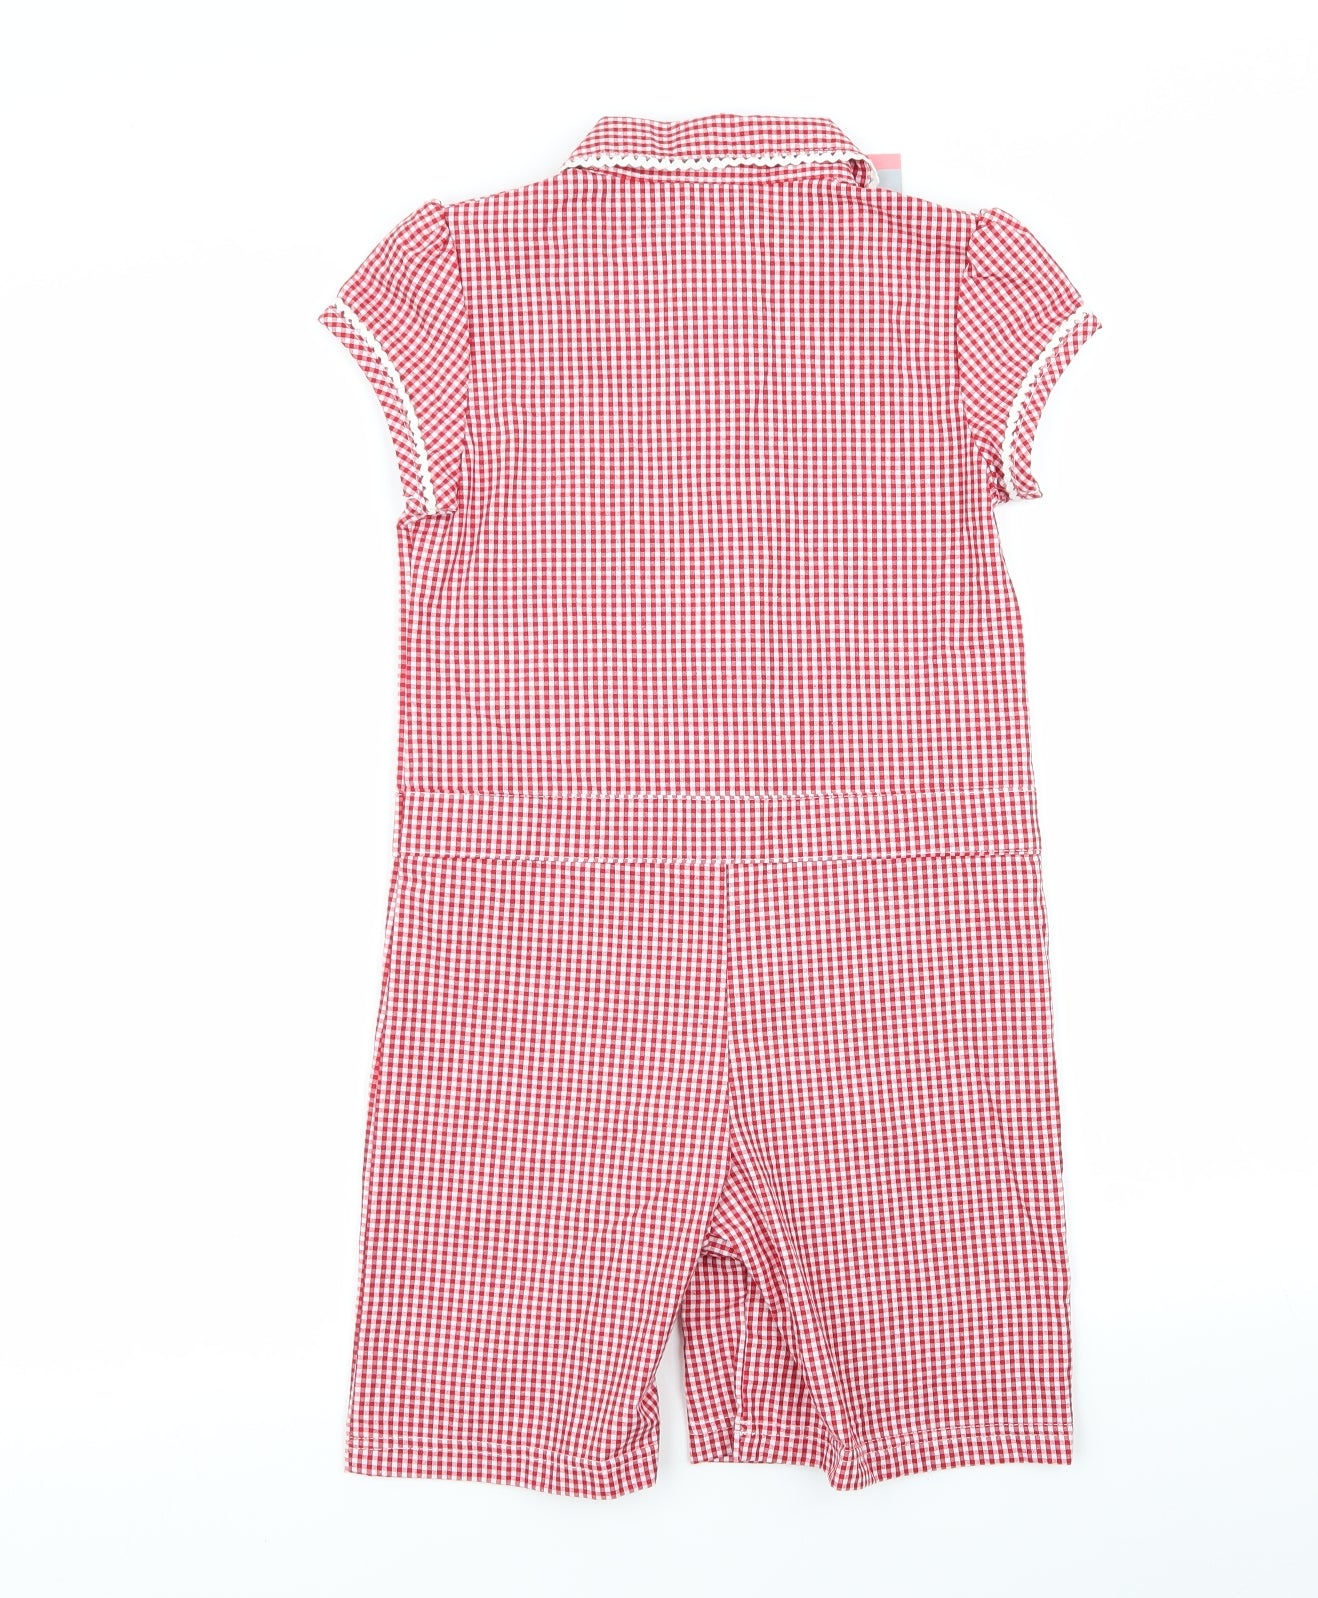 schoolwear Girls  Check  Playsuit One-Piece Size 7 Years